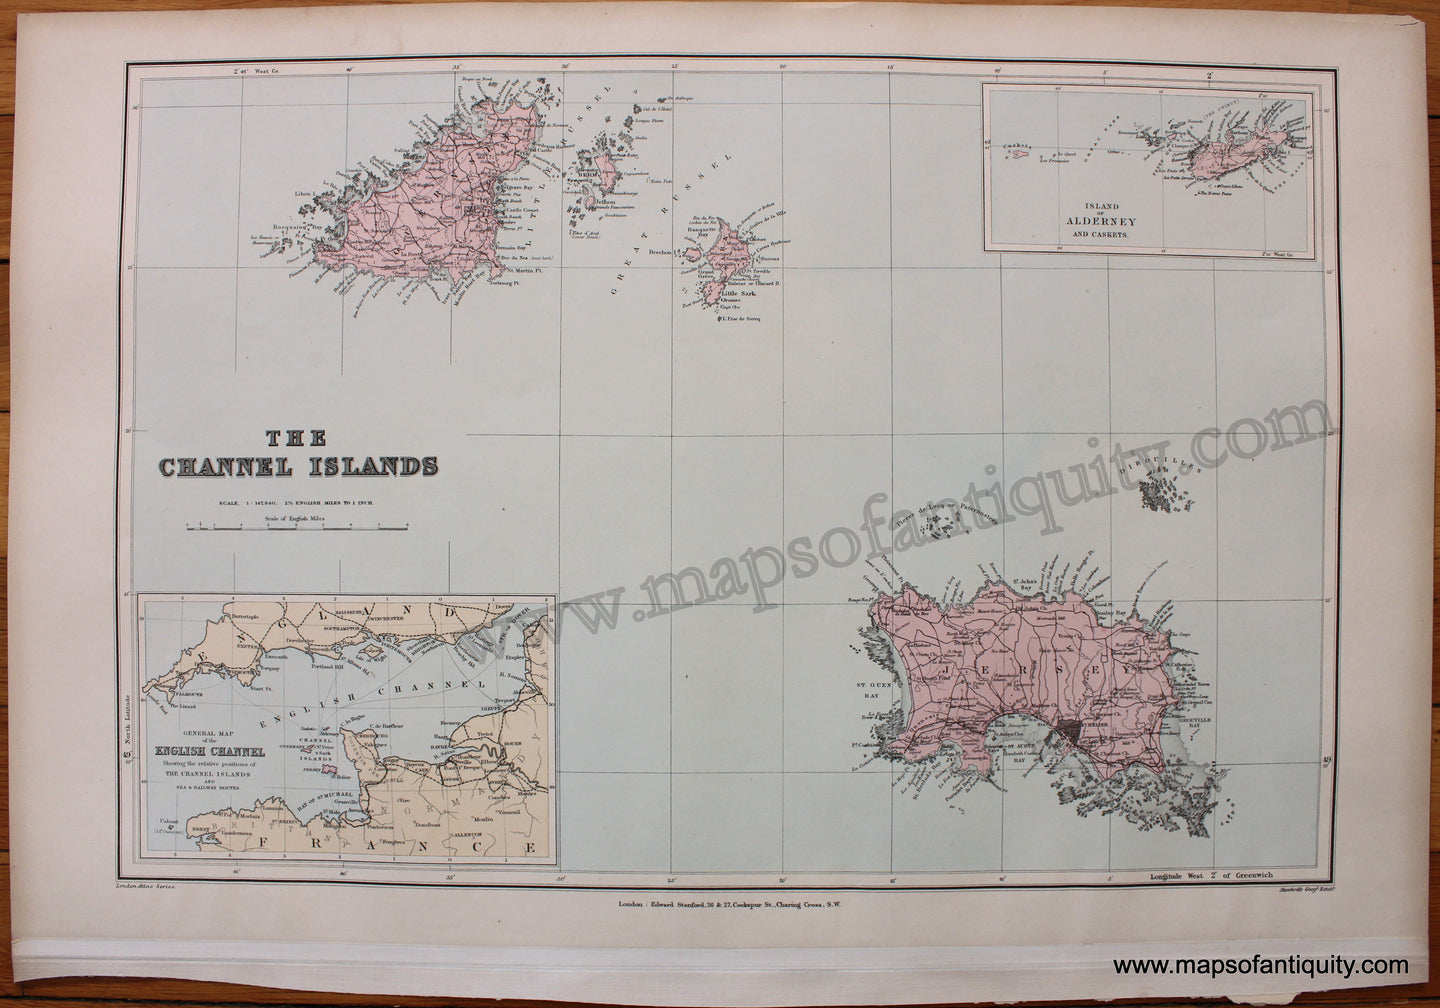 Printed-Color-Antique-Map-The-Channel-Islands-1904-Stanford-England-1800s-19th-century-Maps-of-Antiquity